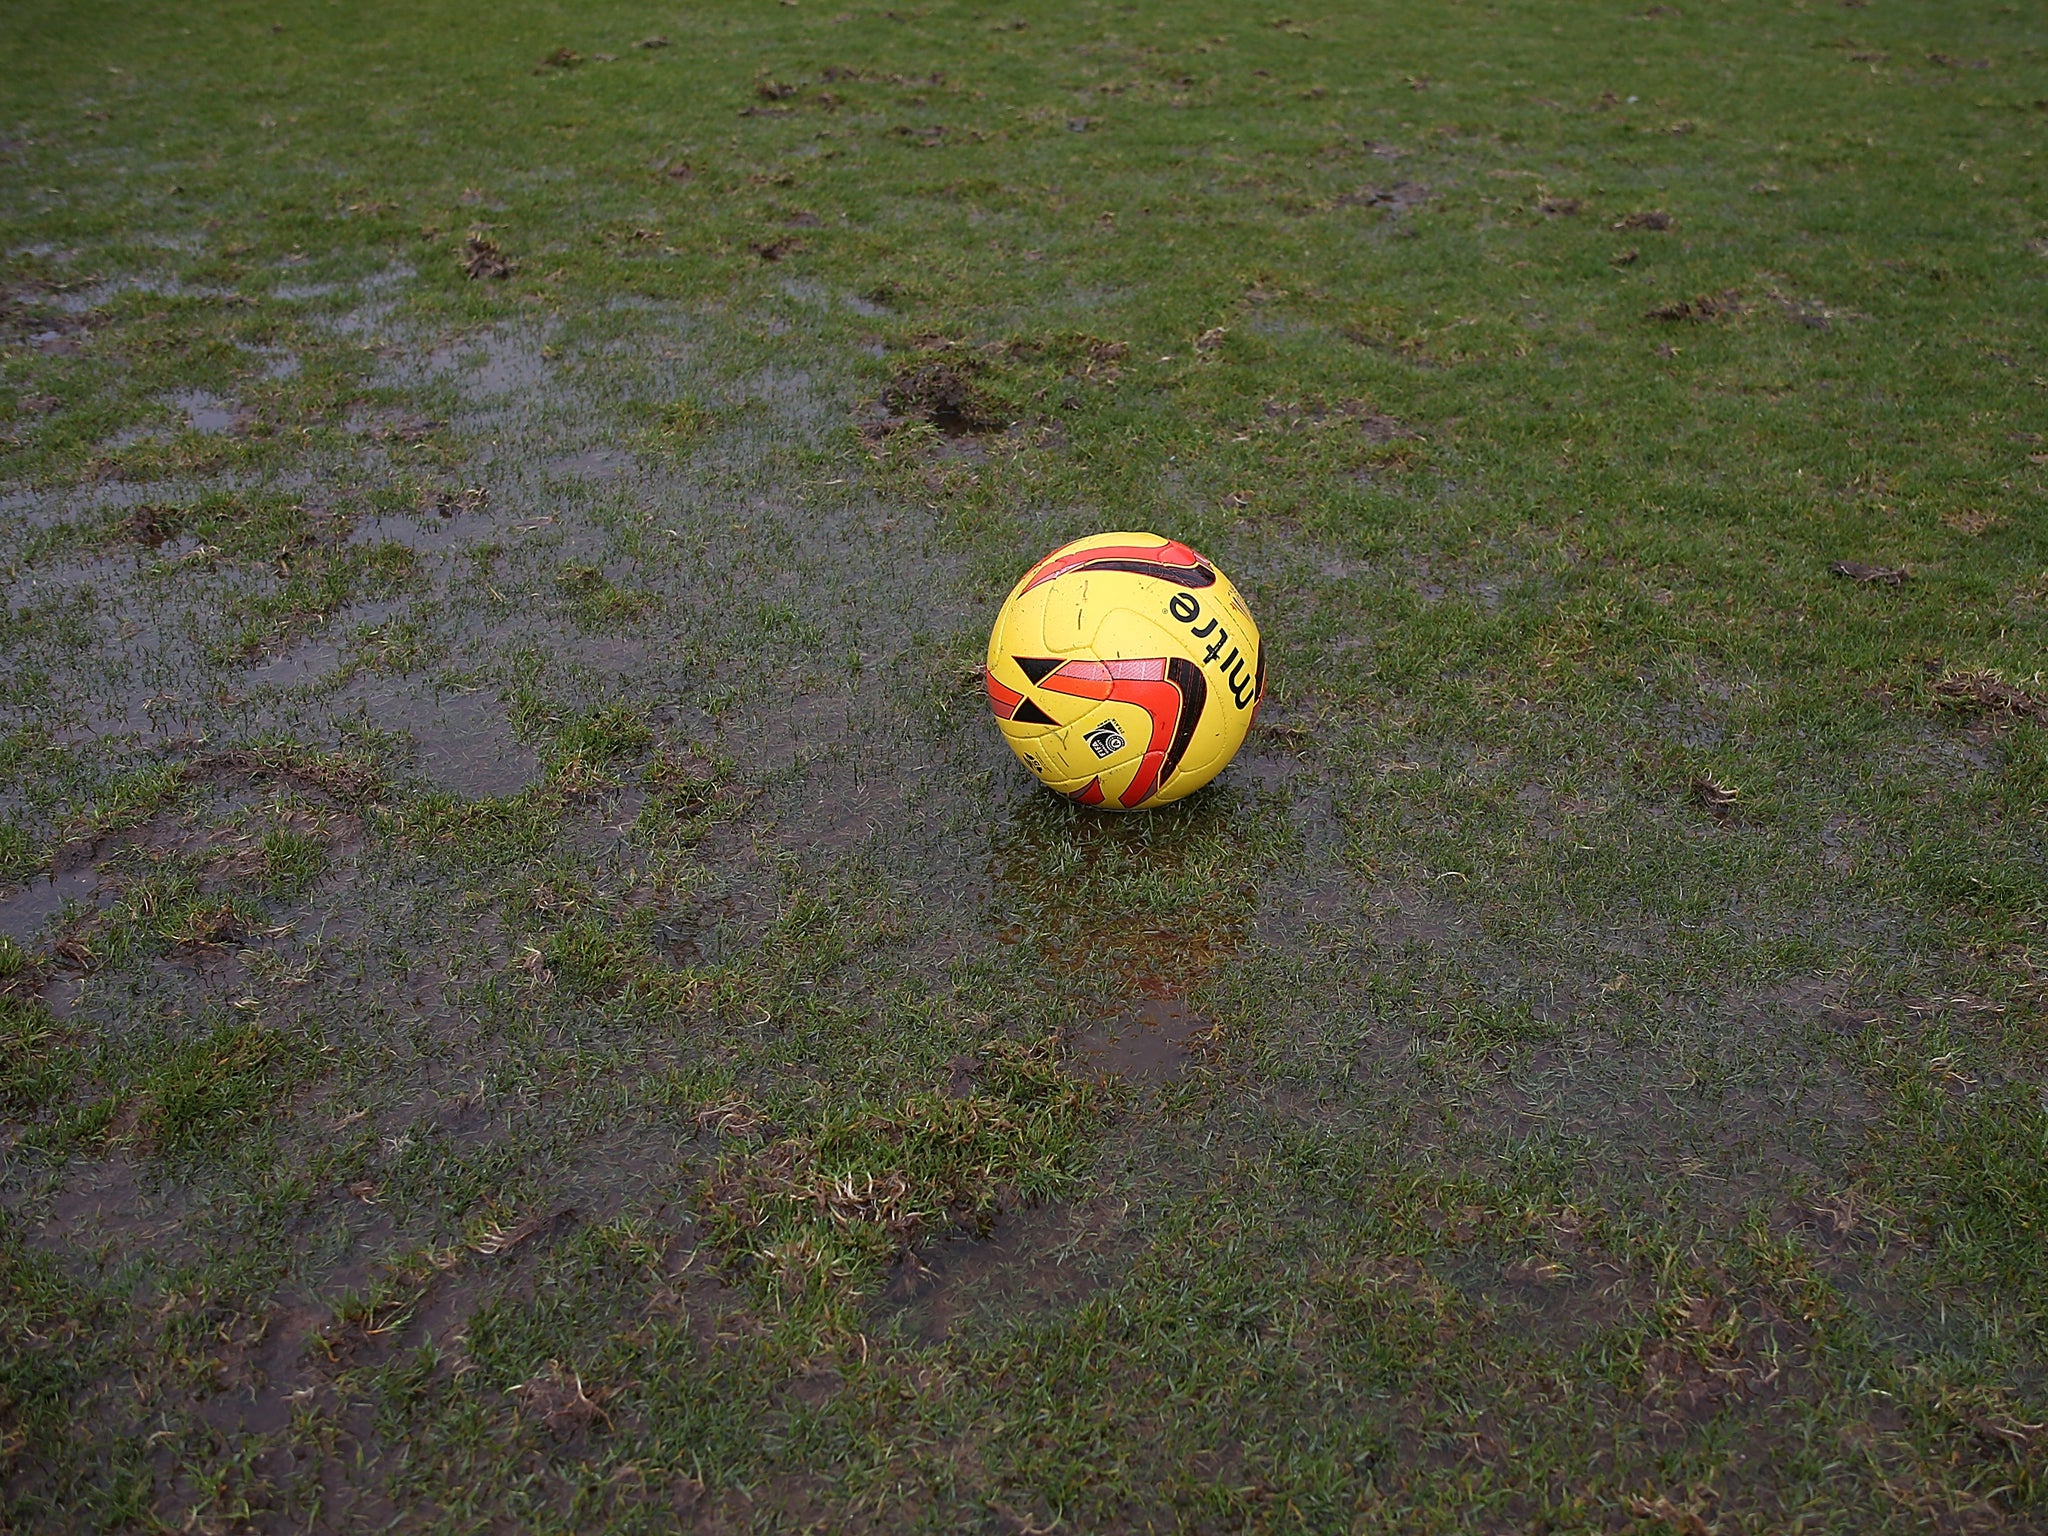 The match at Sixfields between Coventry and Bradford has been called off